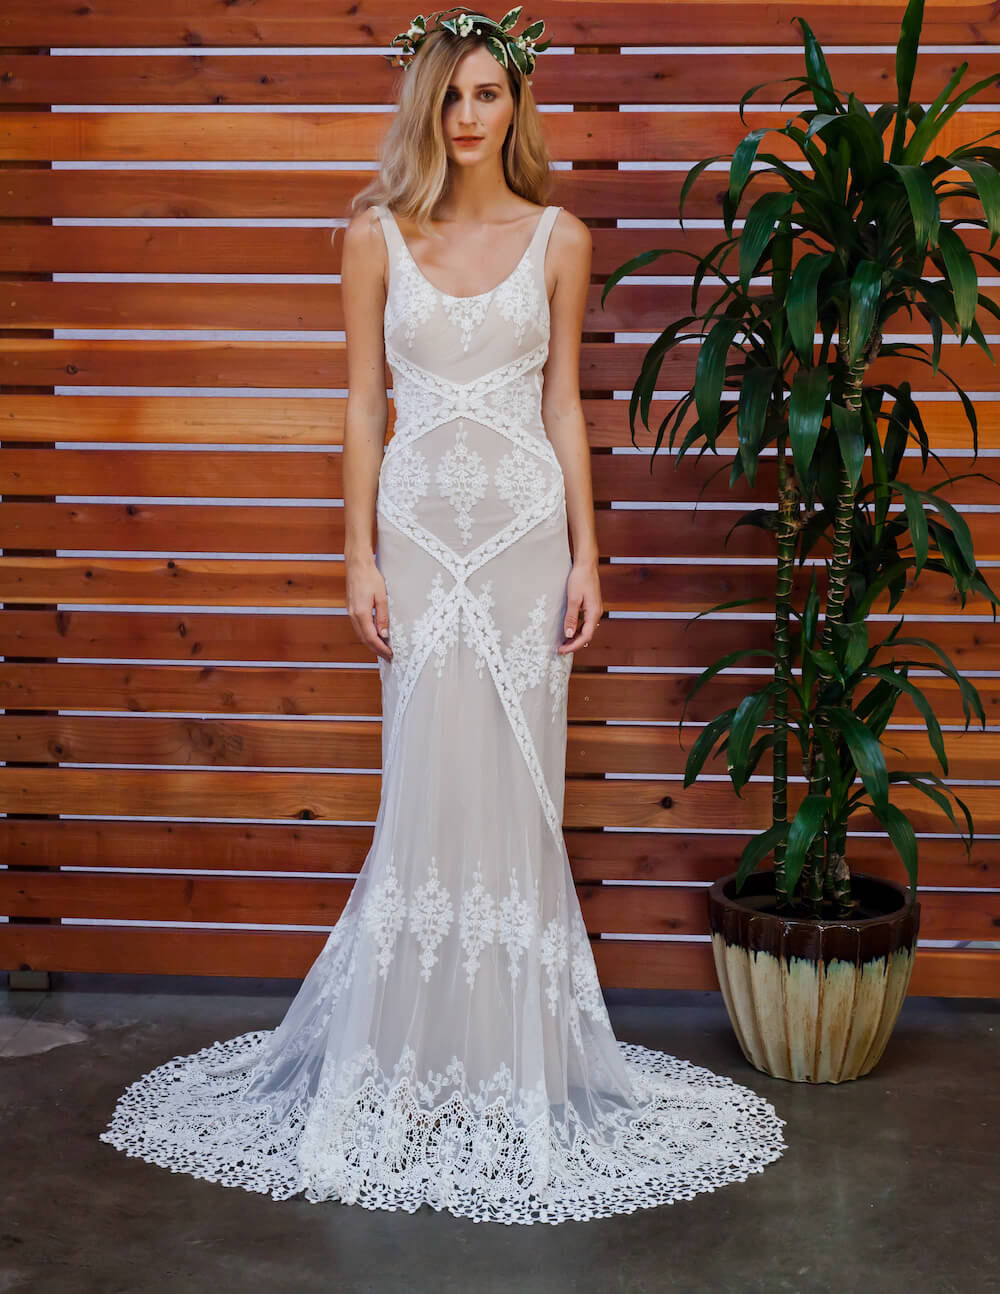 Cecilia Bohemian Lace Wedding Dress | Dreamers and Lovers